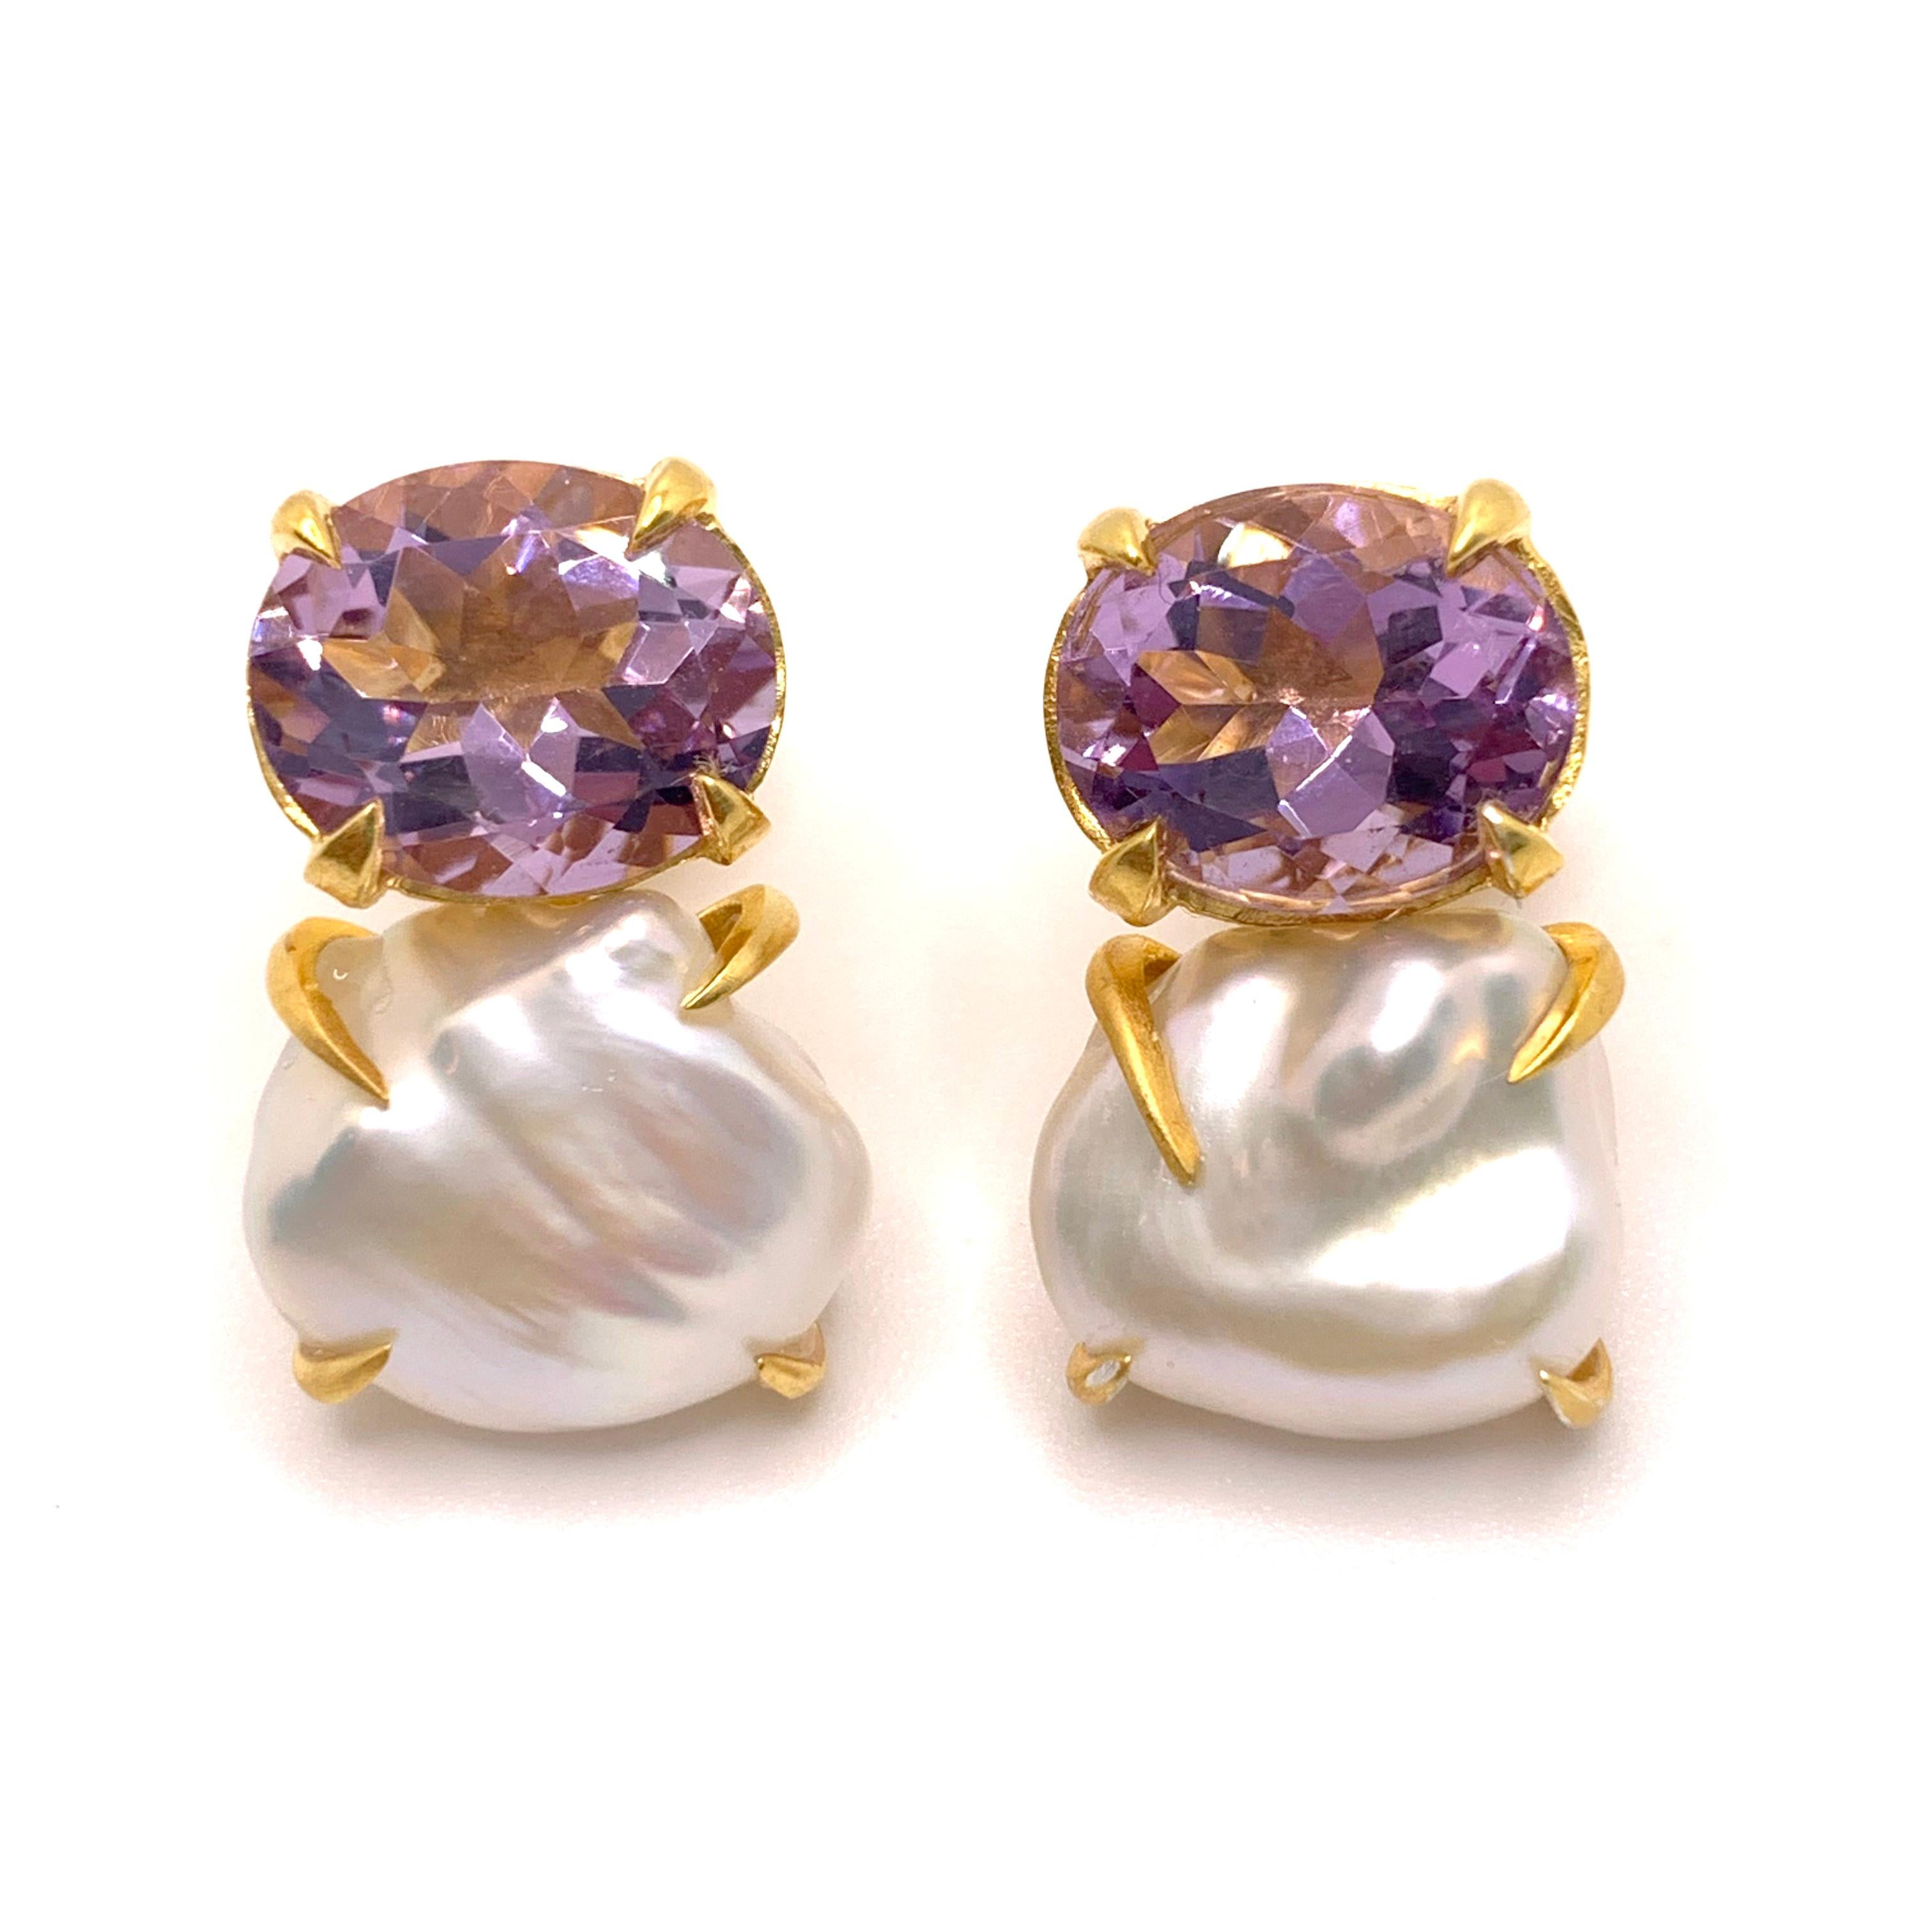 Bijoux Num Oval Amethyst and Keishi Pearl Vermeil Earrings. 
The stunning pair of earrings feature beautiful genuine oval Amethyst and lustrous cultured Japanese Keishi pearl, handset in 18k gold vermeil over sterling silver and brush satin finish. 